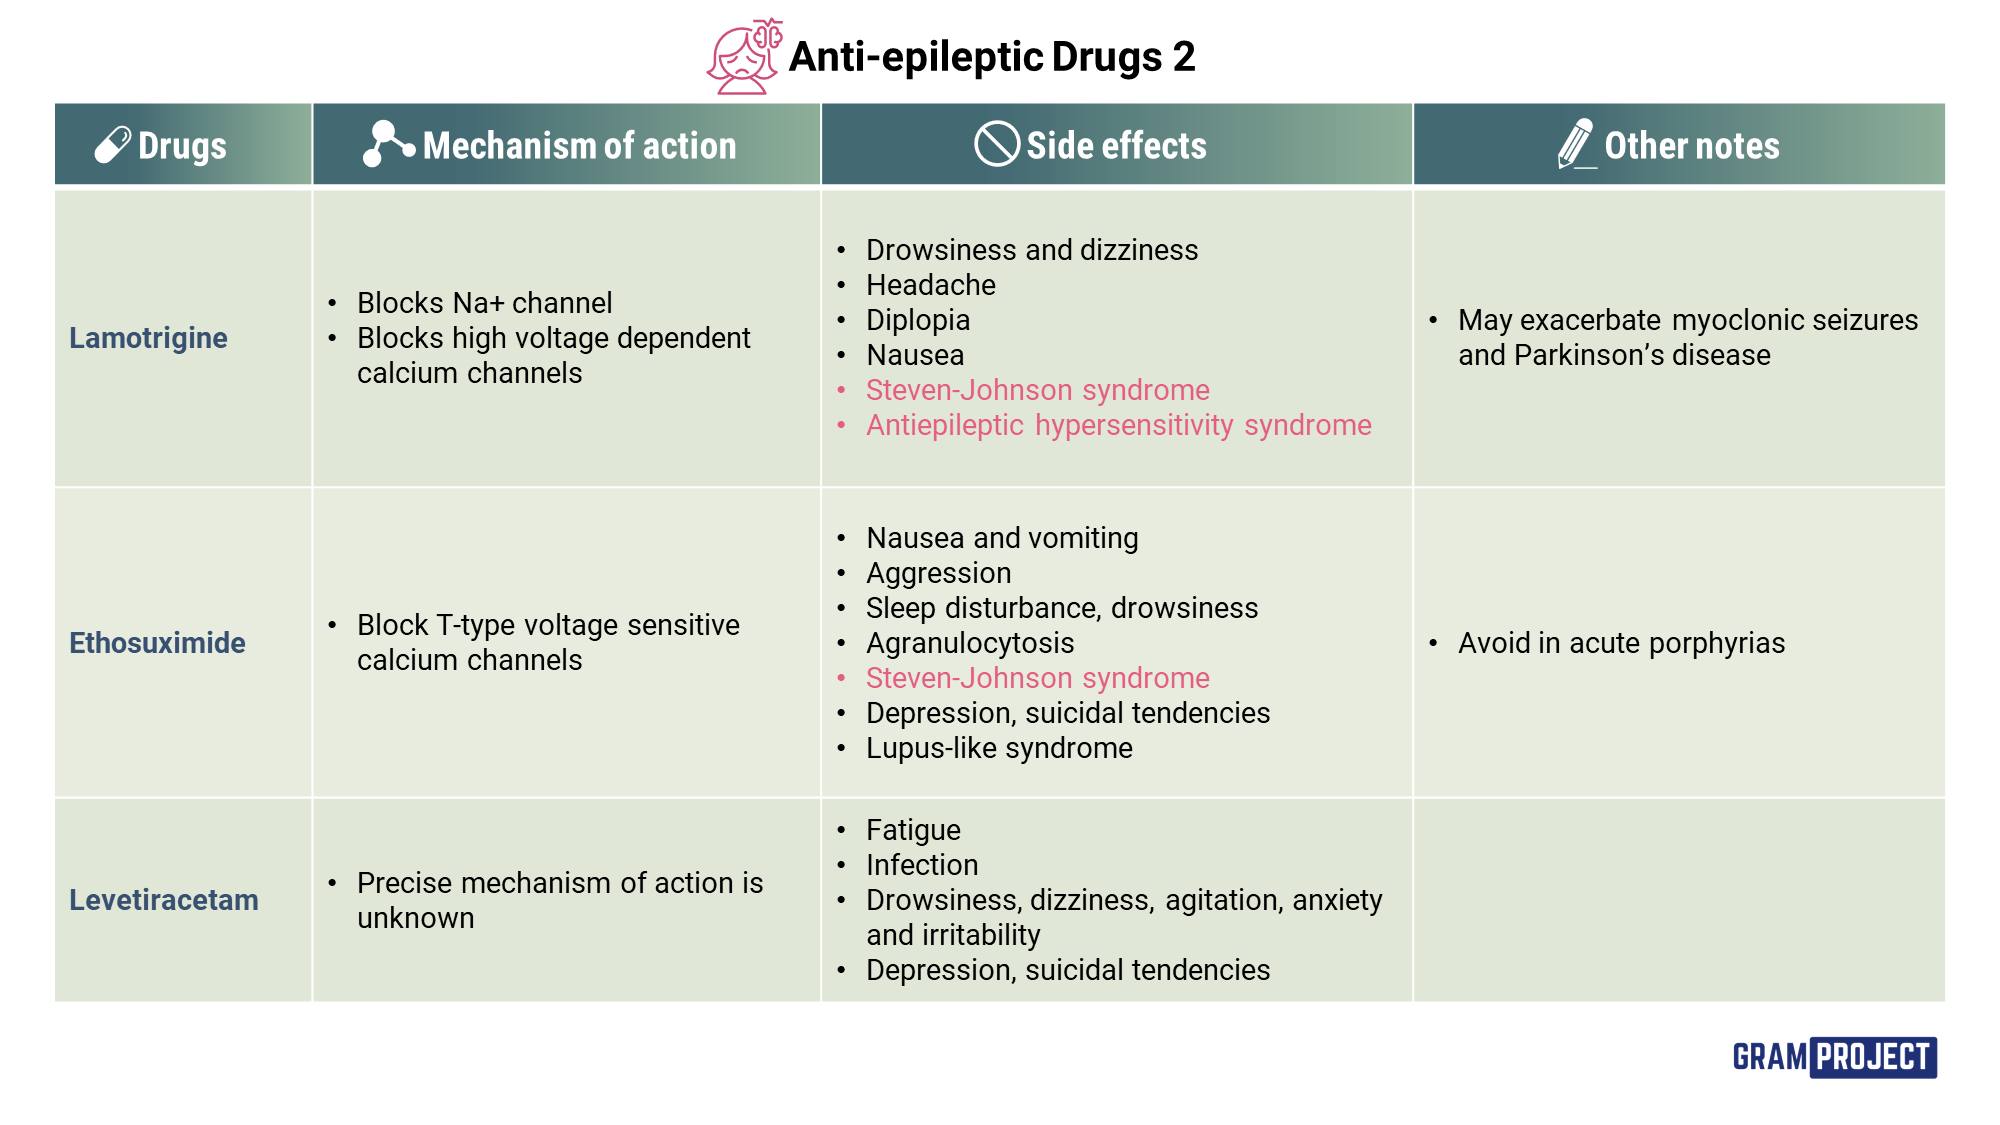 Summary table of commonly used anti-epileptic drugs